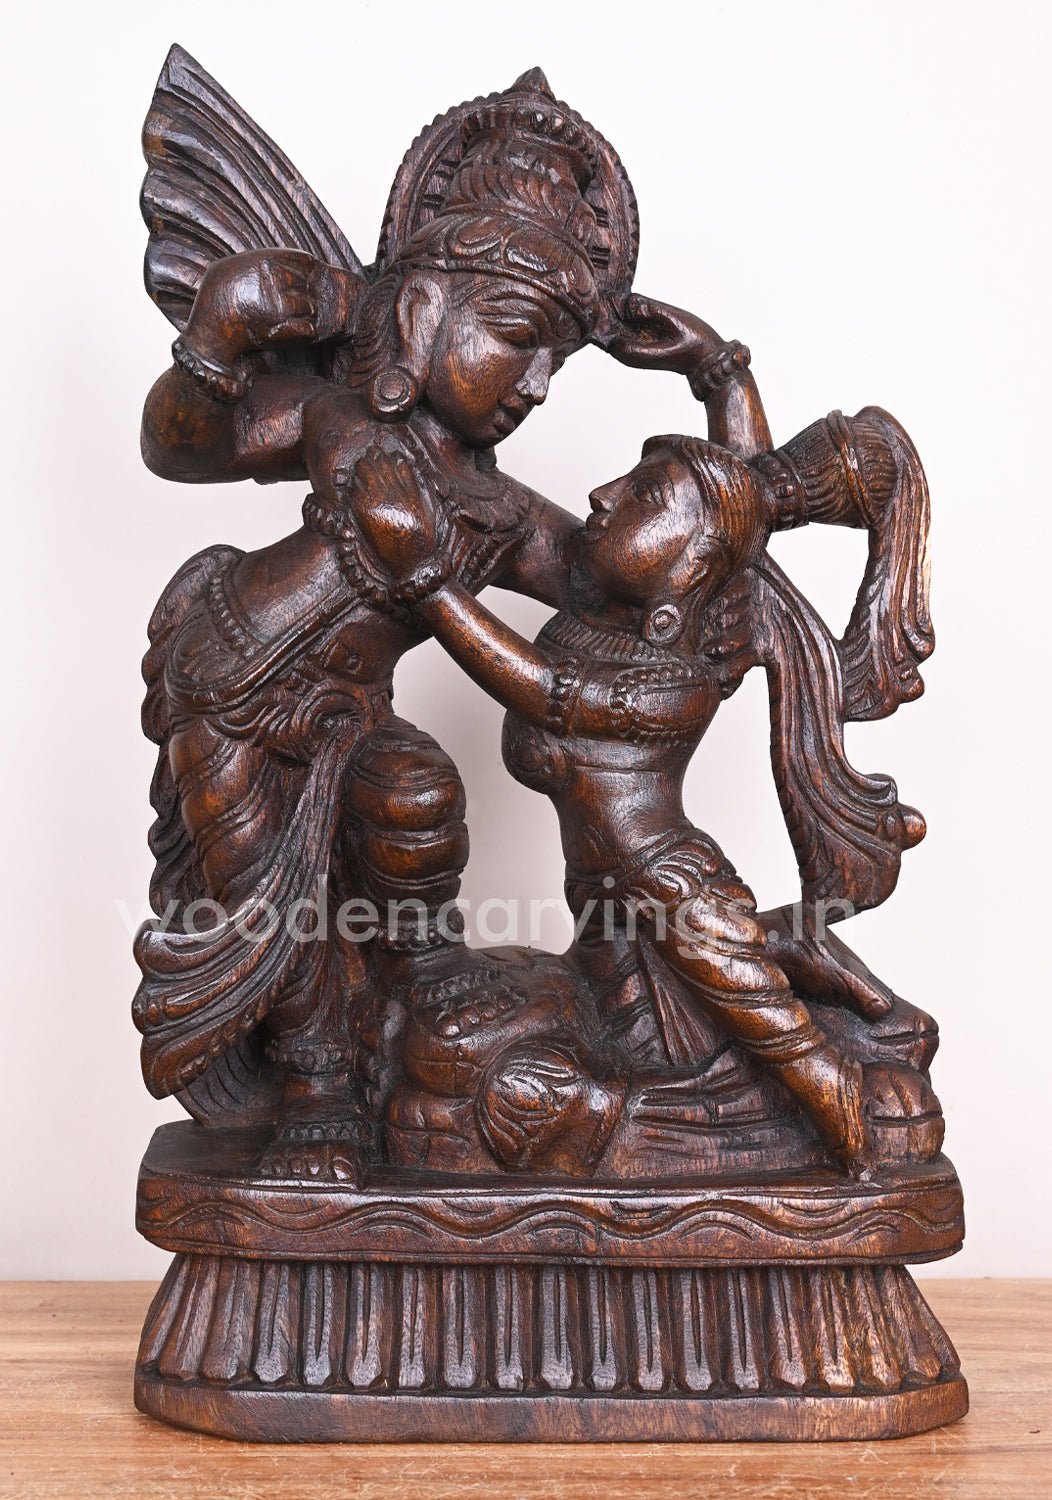 Handcrafted Beautiful Lord Krishna with Love Radha Standing Light Weight Wooden Sculpture 19'"